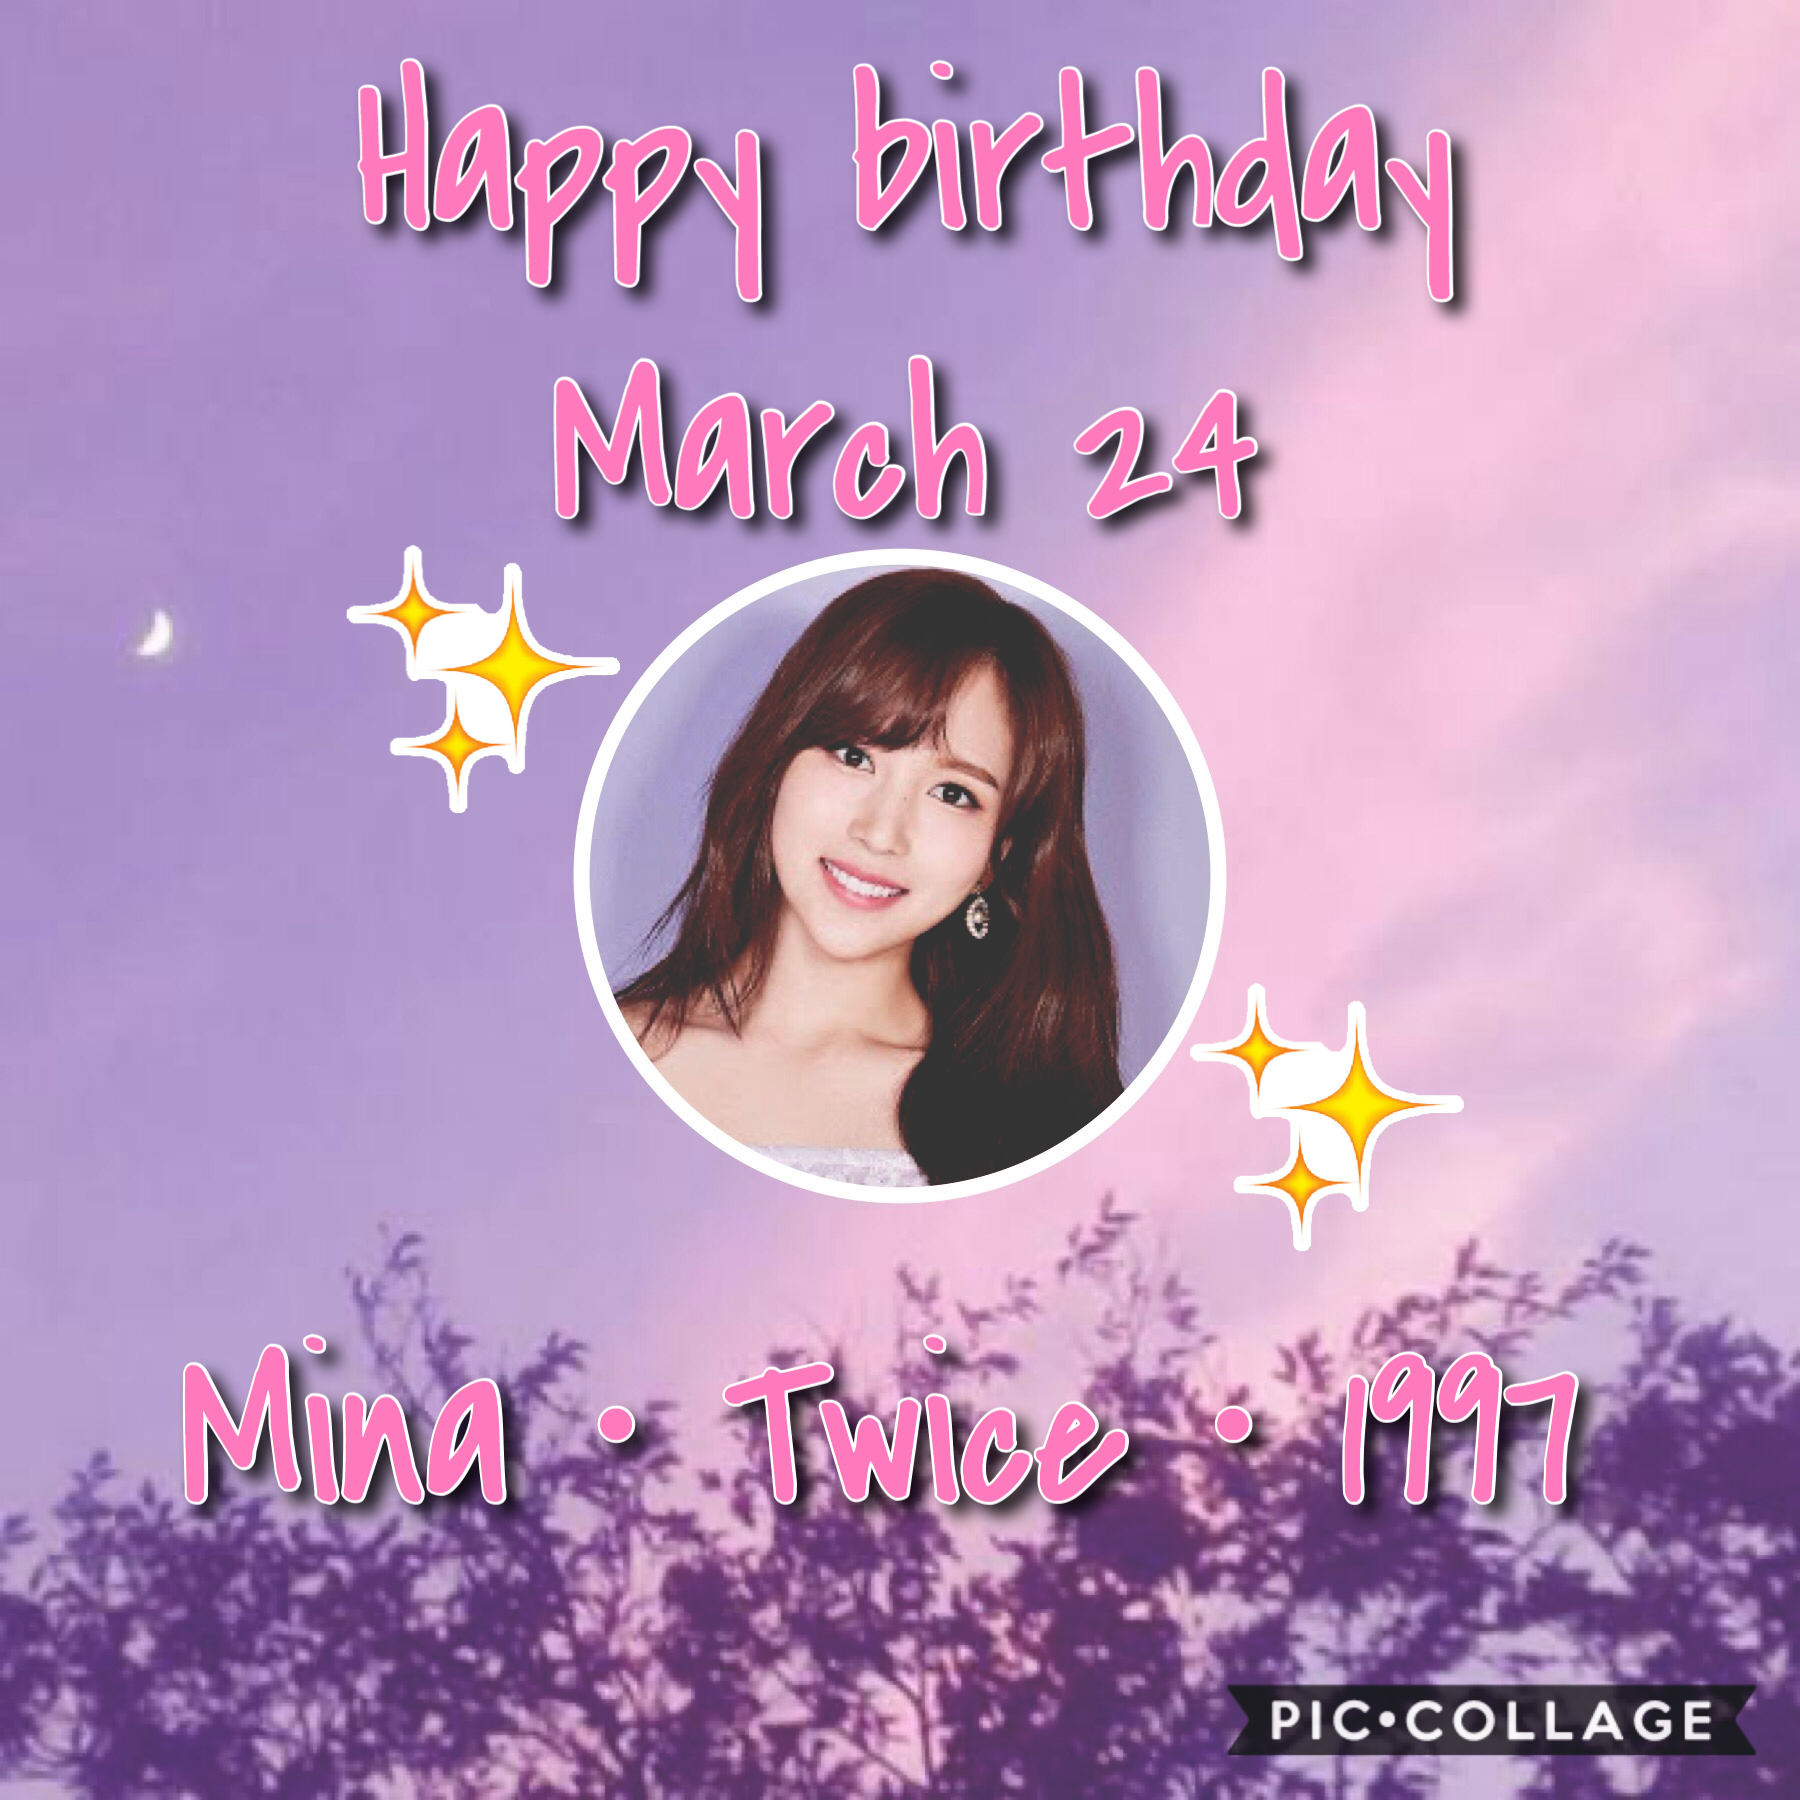 •🌷🌹•
Happy birthday queen!🥺❤️❤️
Other birthdays:
•Park Bom~March 24
•TREASURE 13’s Mashiho~ March 25
🌹🌷~Whoop~🌷🌹